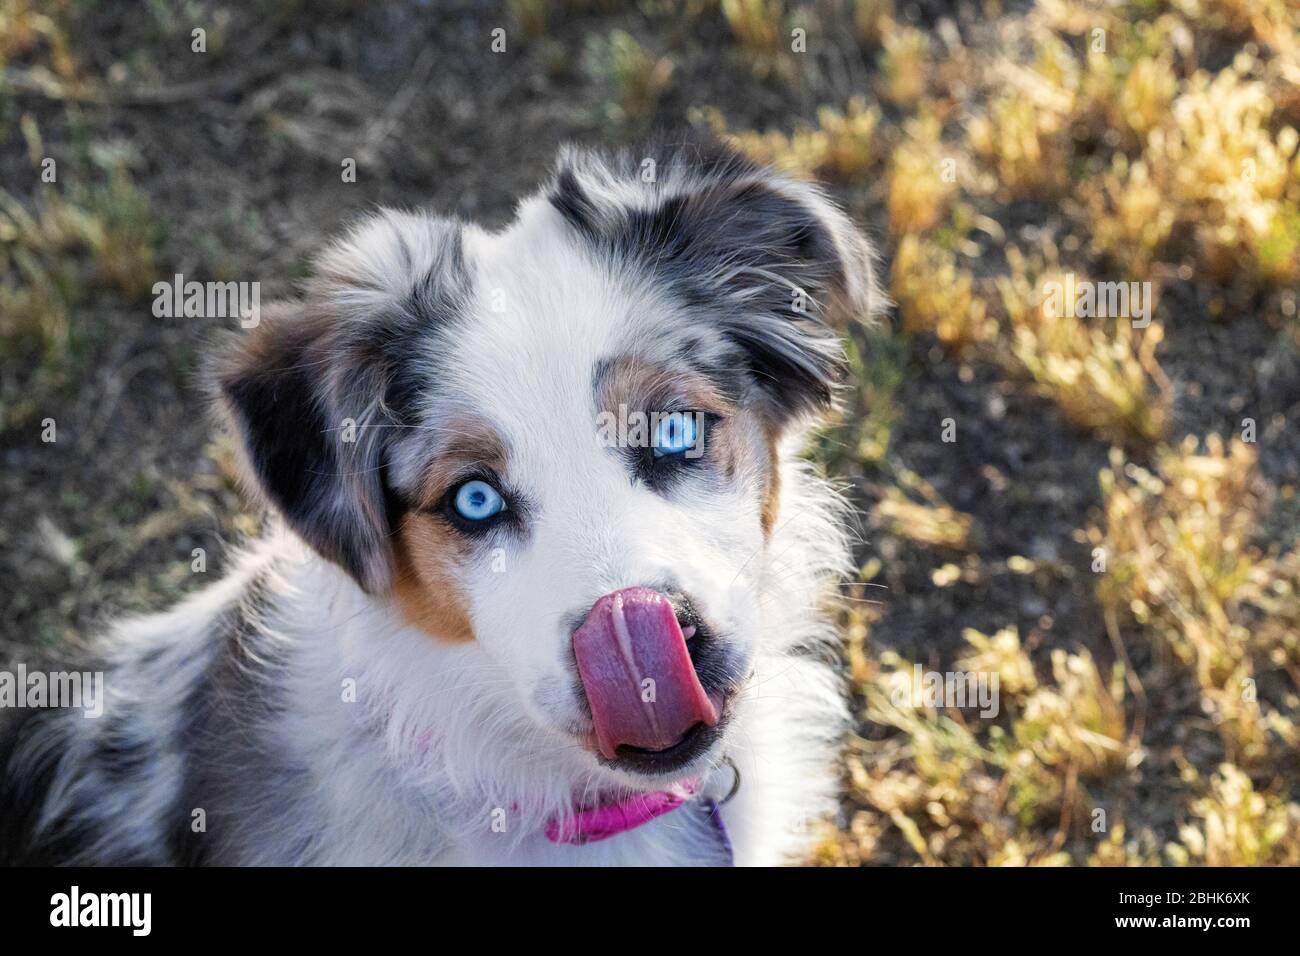 Australian shepherd puppy, looking hungry, licking her chops. Stock Photo